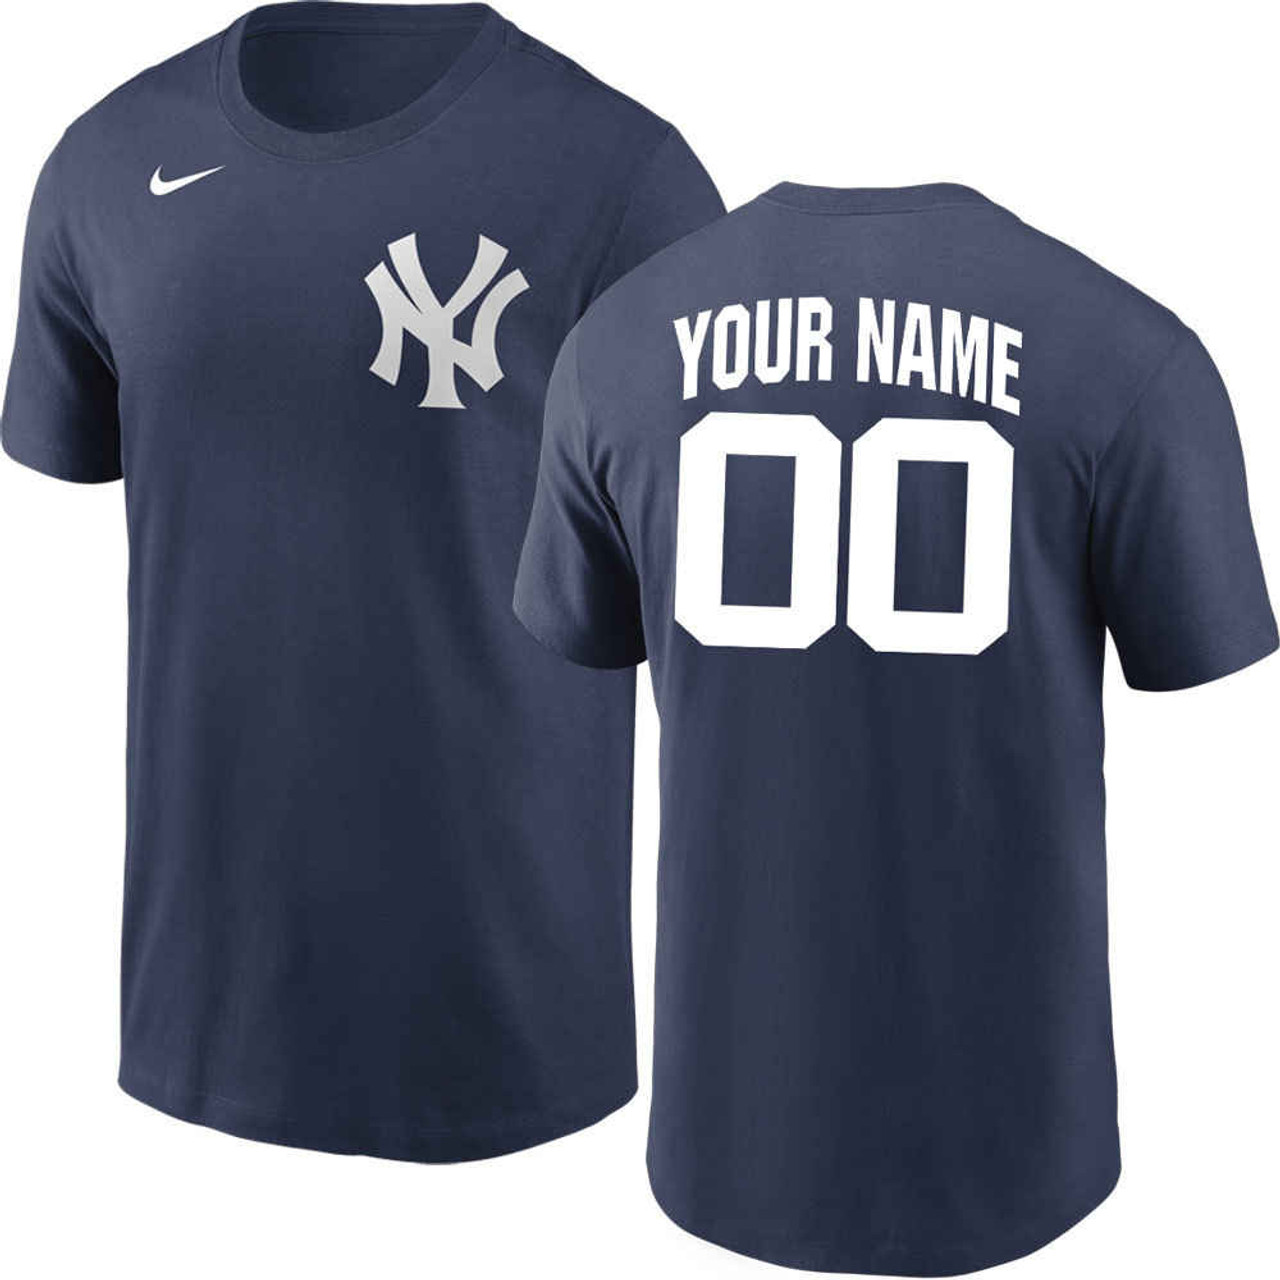 personalized yankee jersey for toddlers